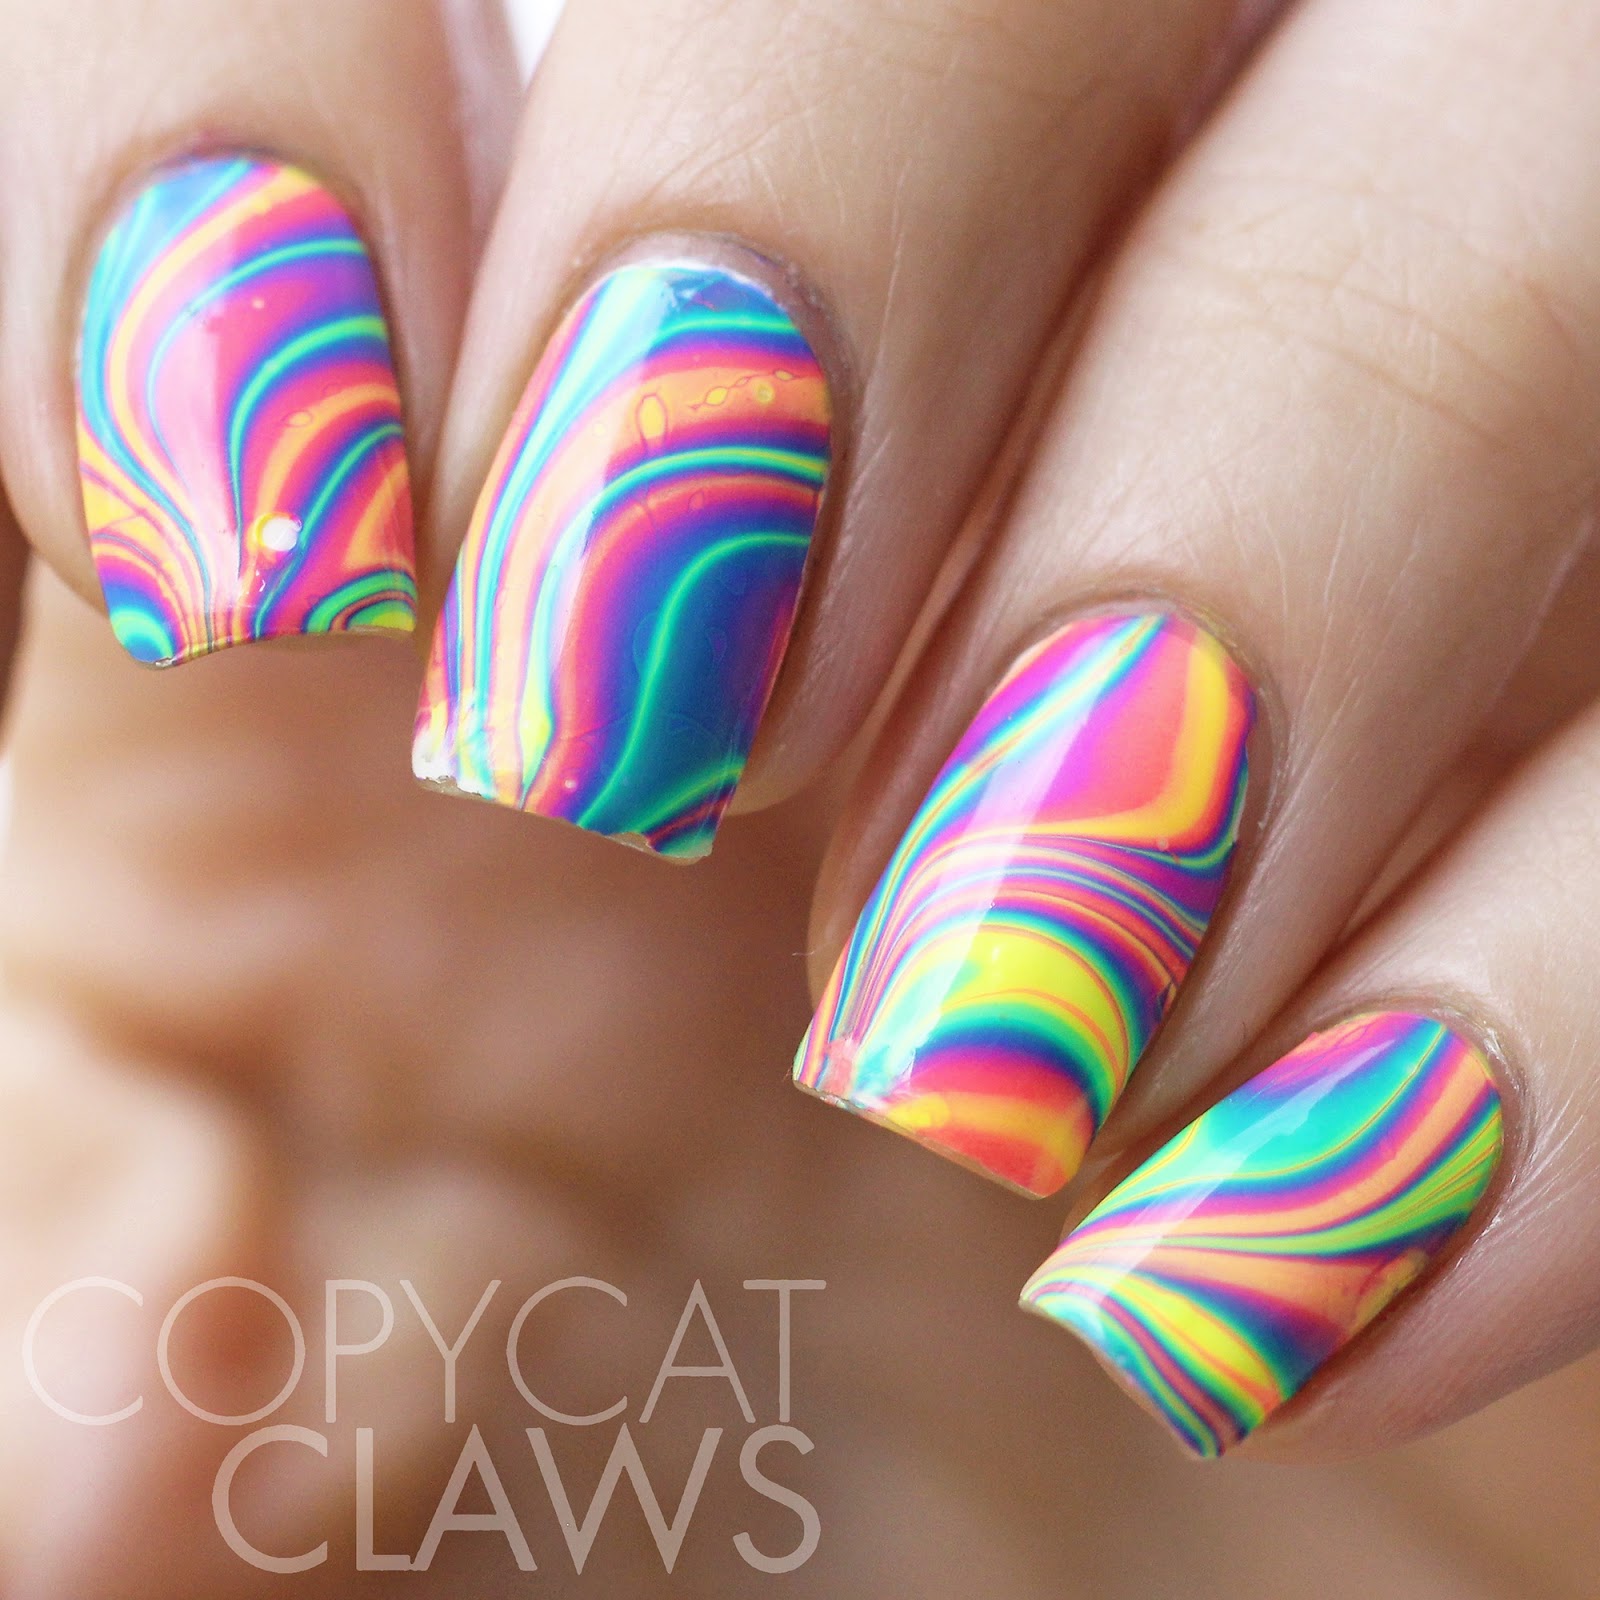 Copycat Claws: Water Marble Nails with B Squared Lacquer's EDM Collex